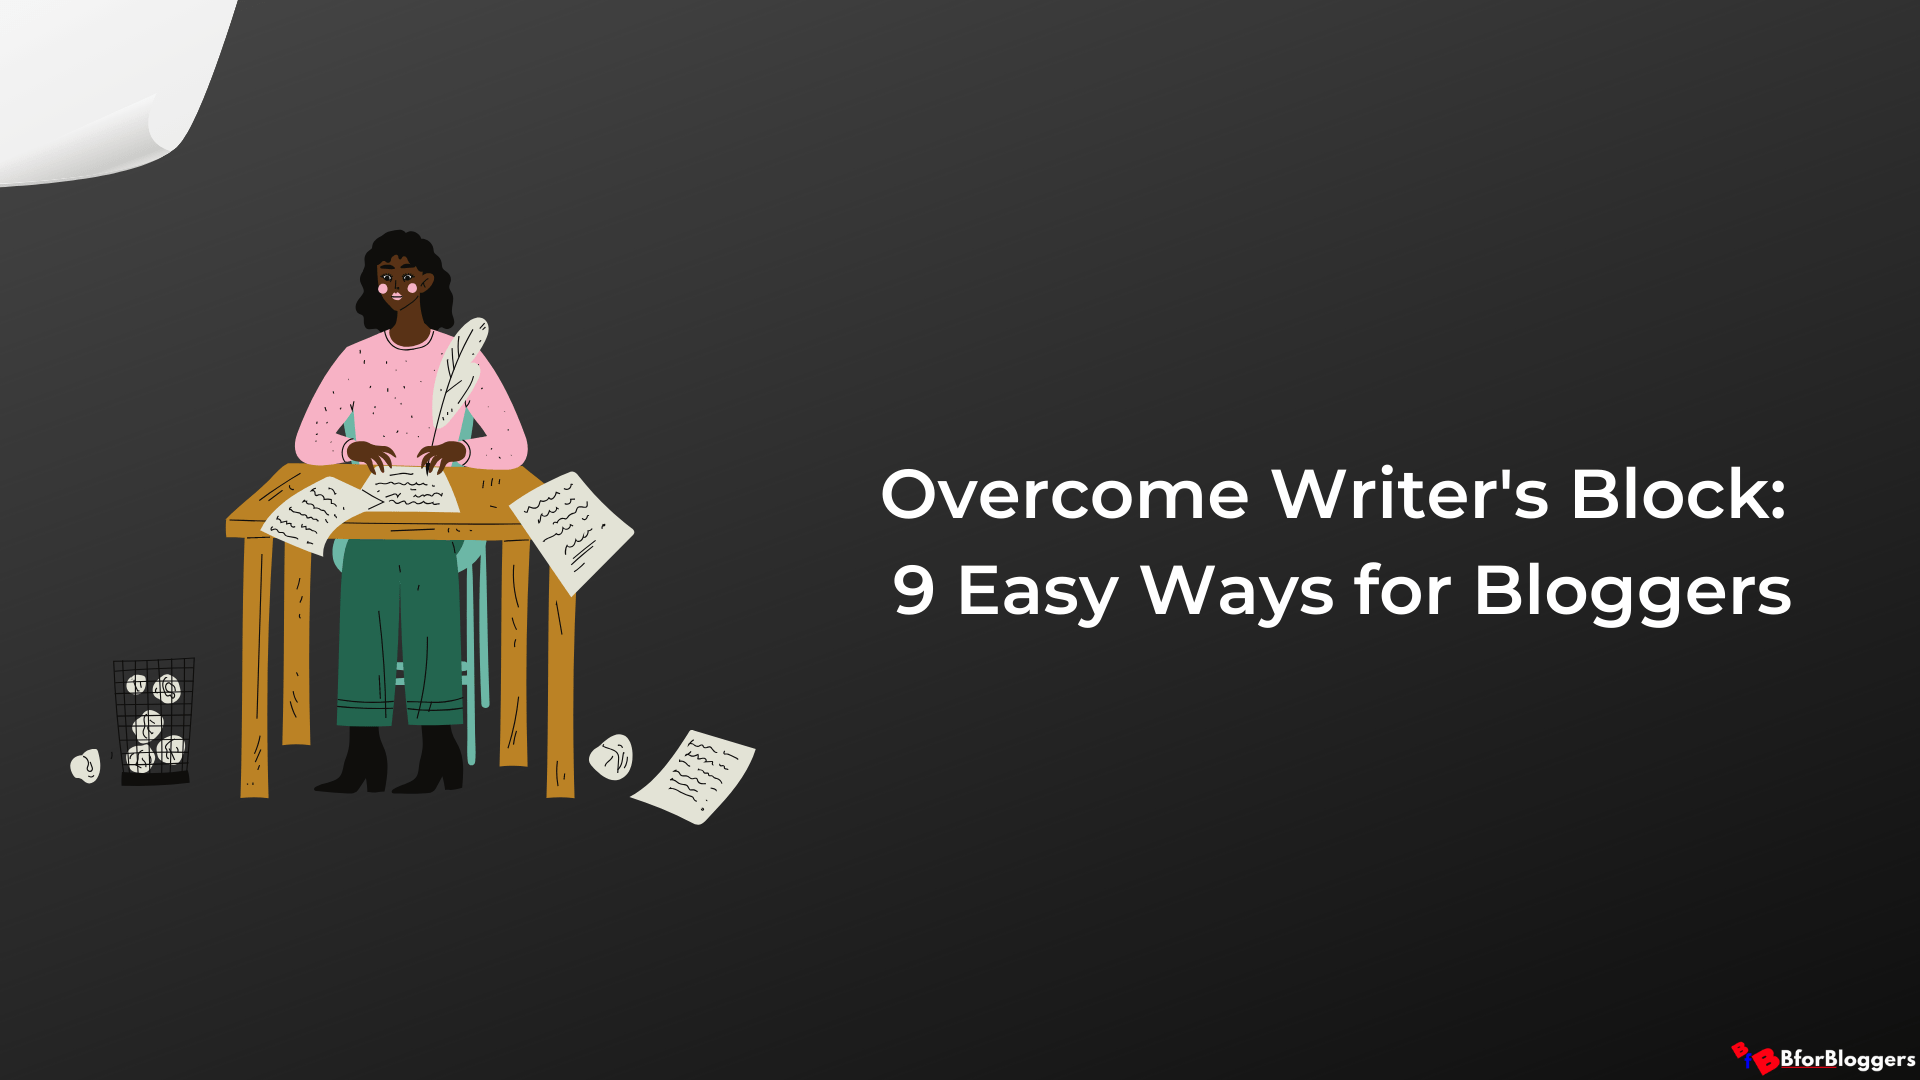 Overcome Writer’s Block: 9 Ways to Get Past Blinking Cursor